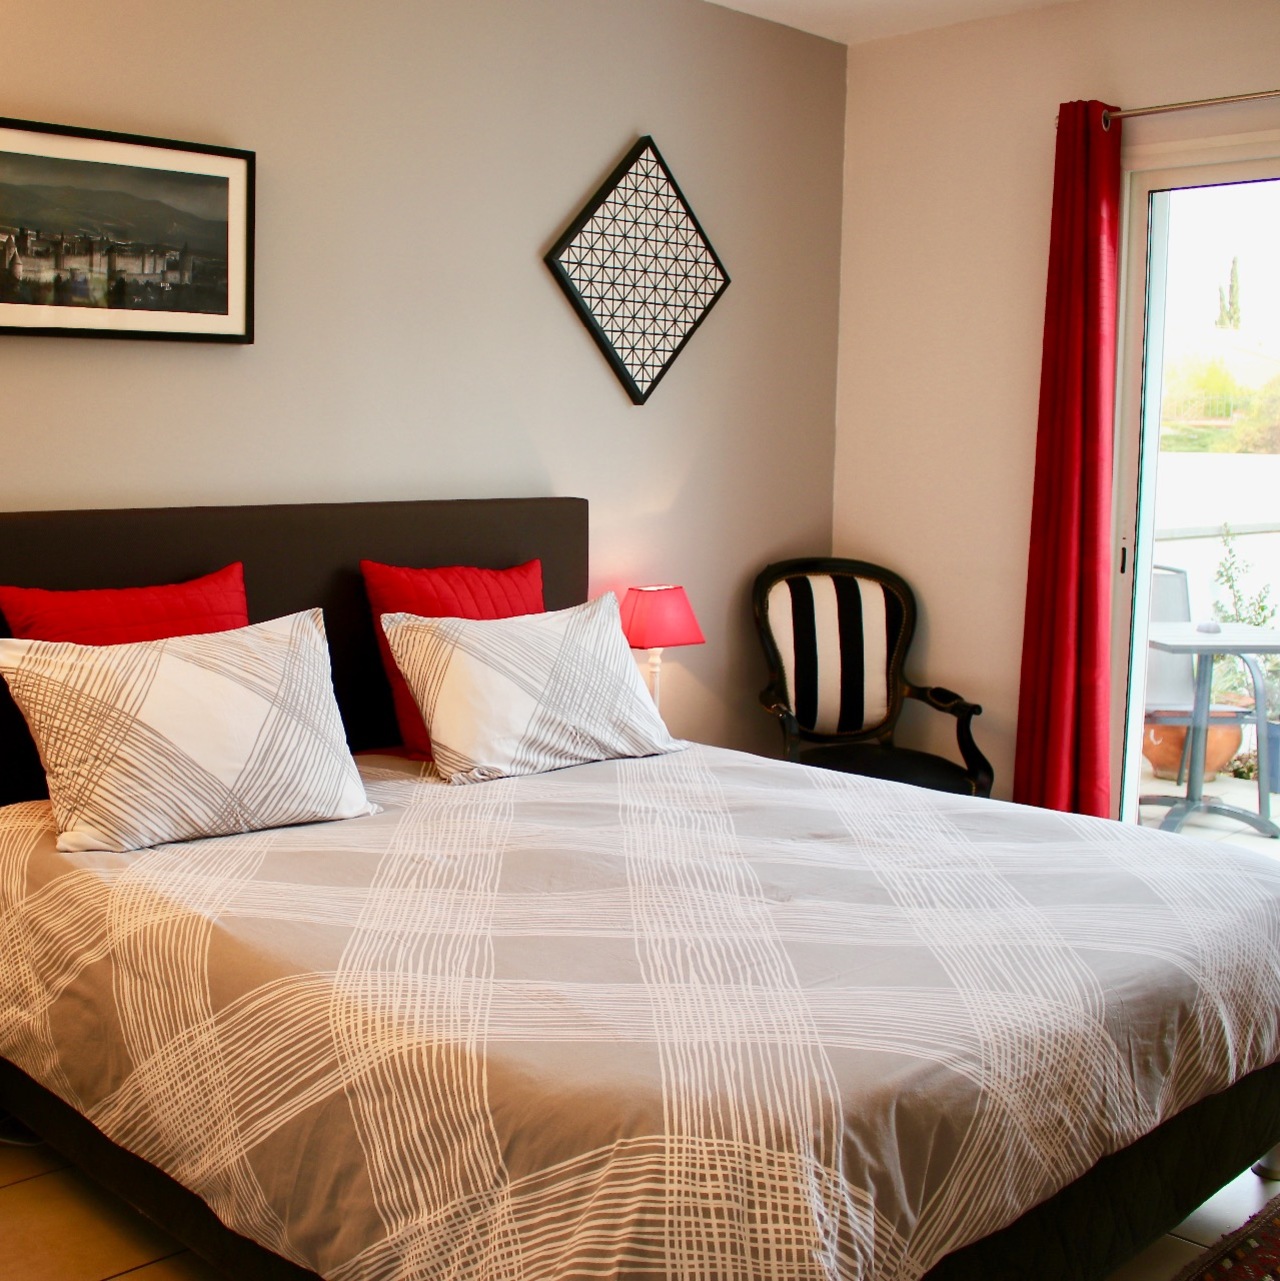 Suite with King-size double bed and terrace